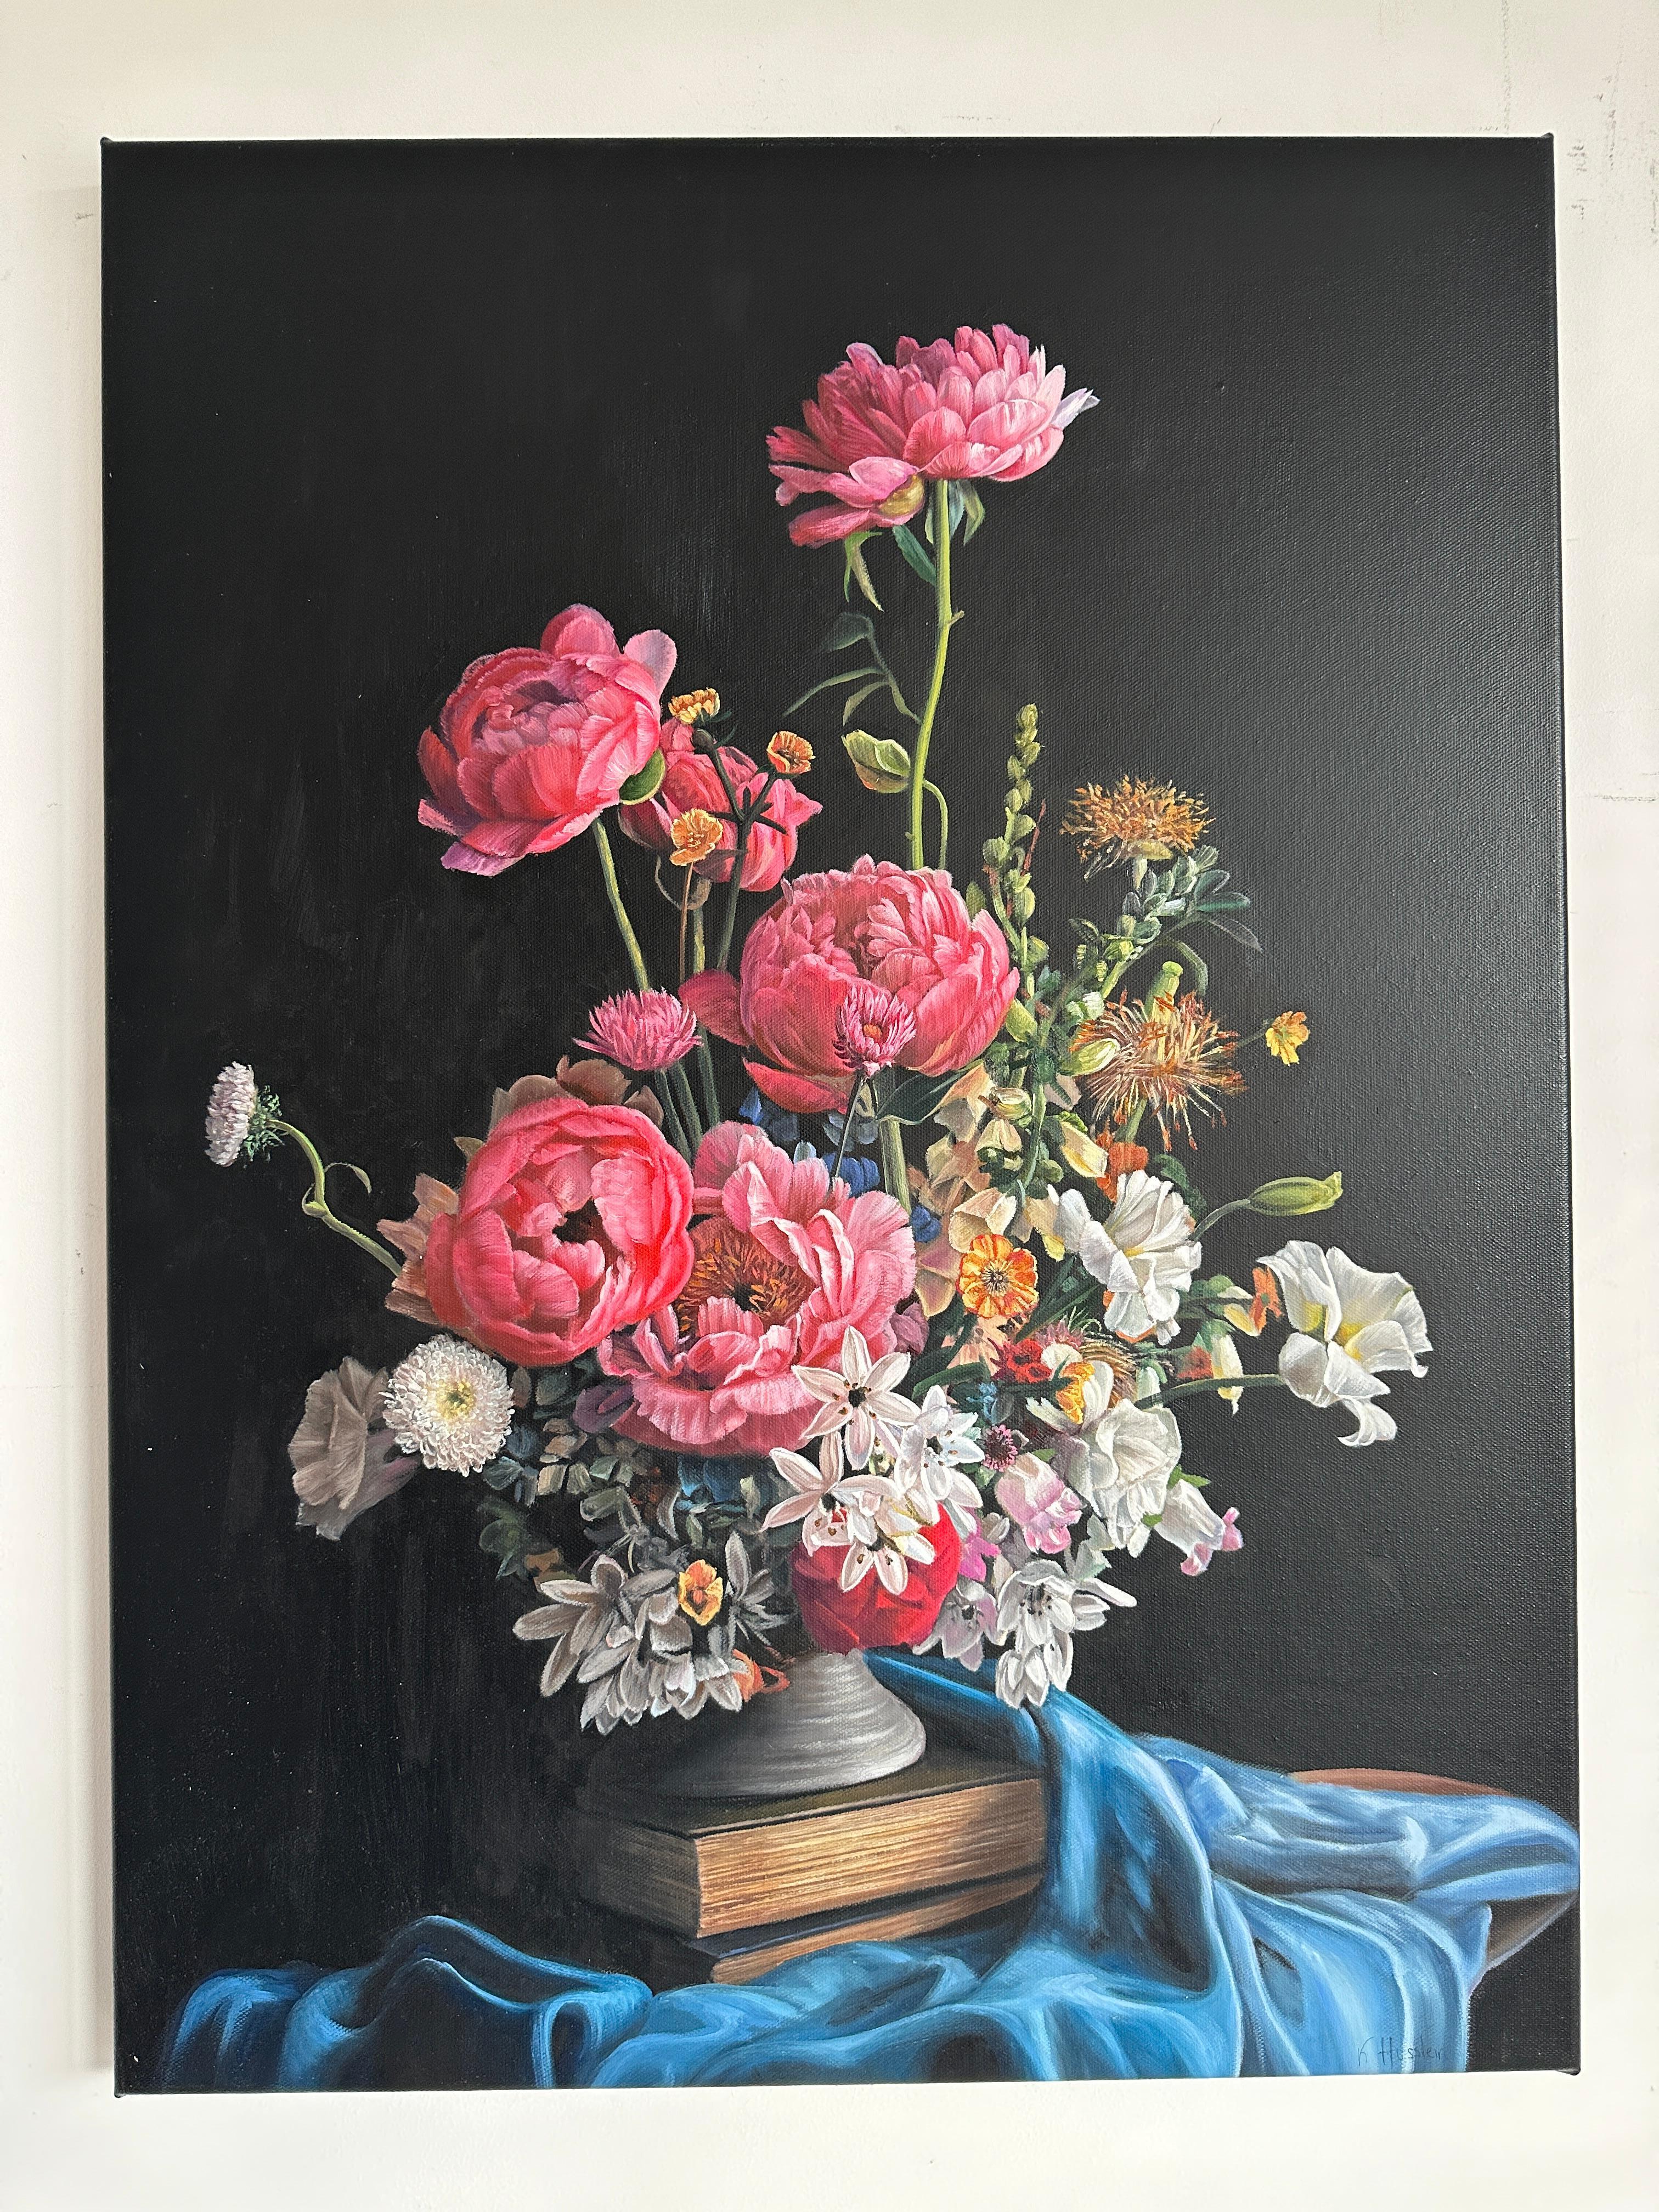 The Worship of this Love by K Husslein Botanical Hyperrealistic Still life - Photorealist Painting by Katharina Husslein